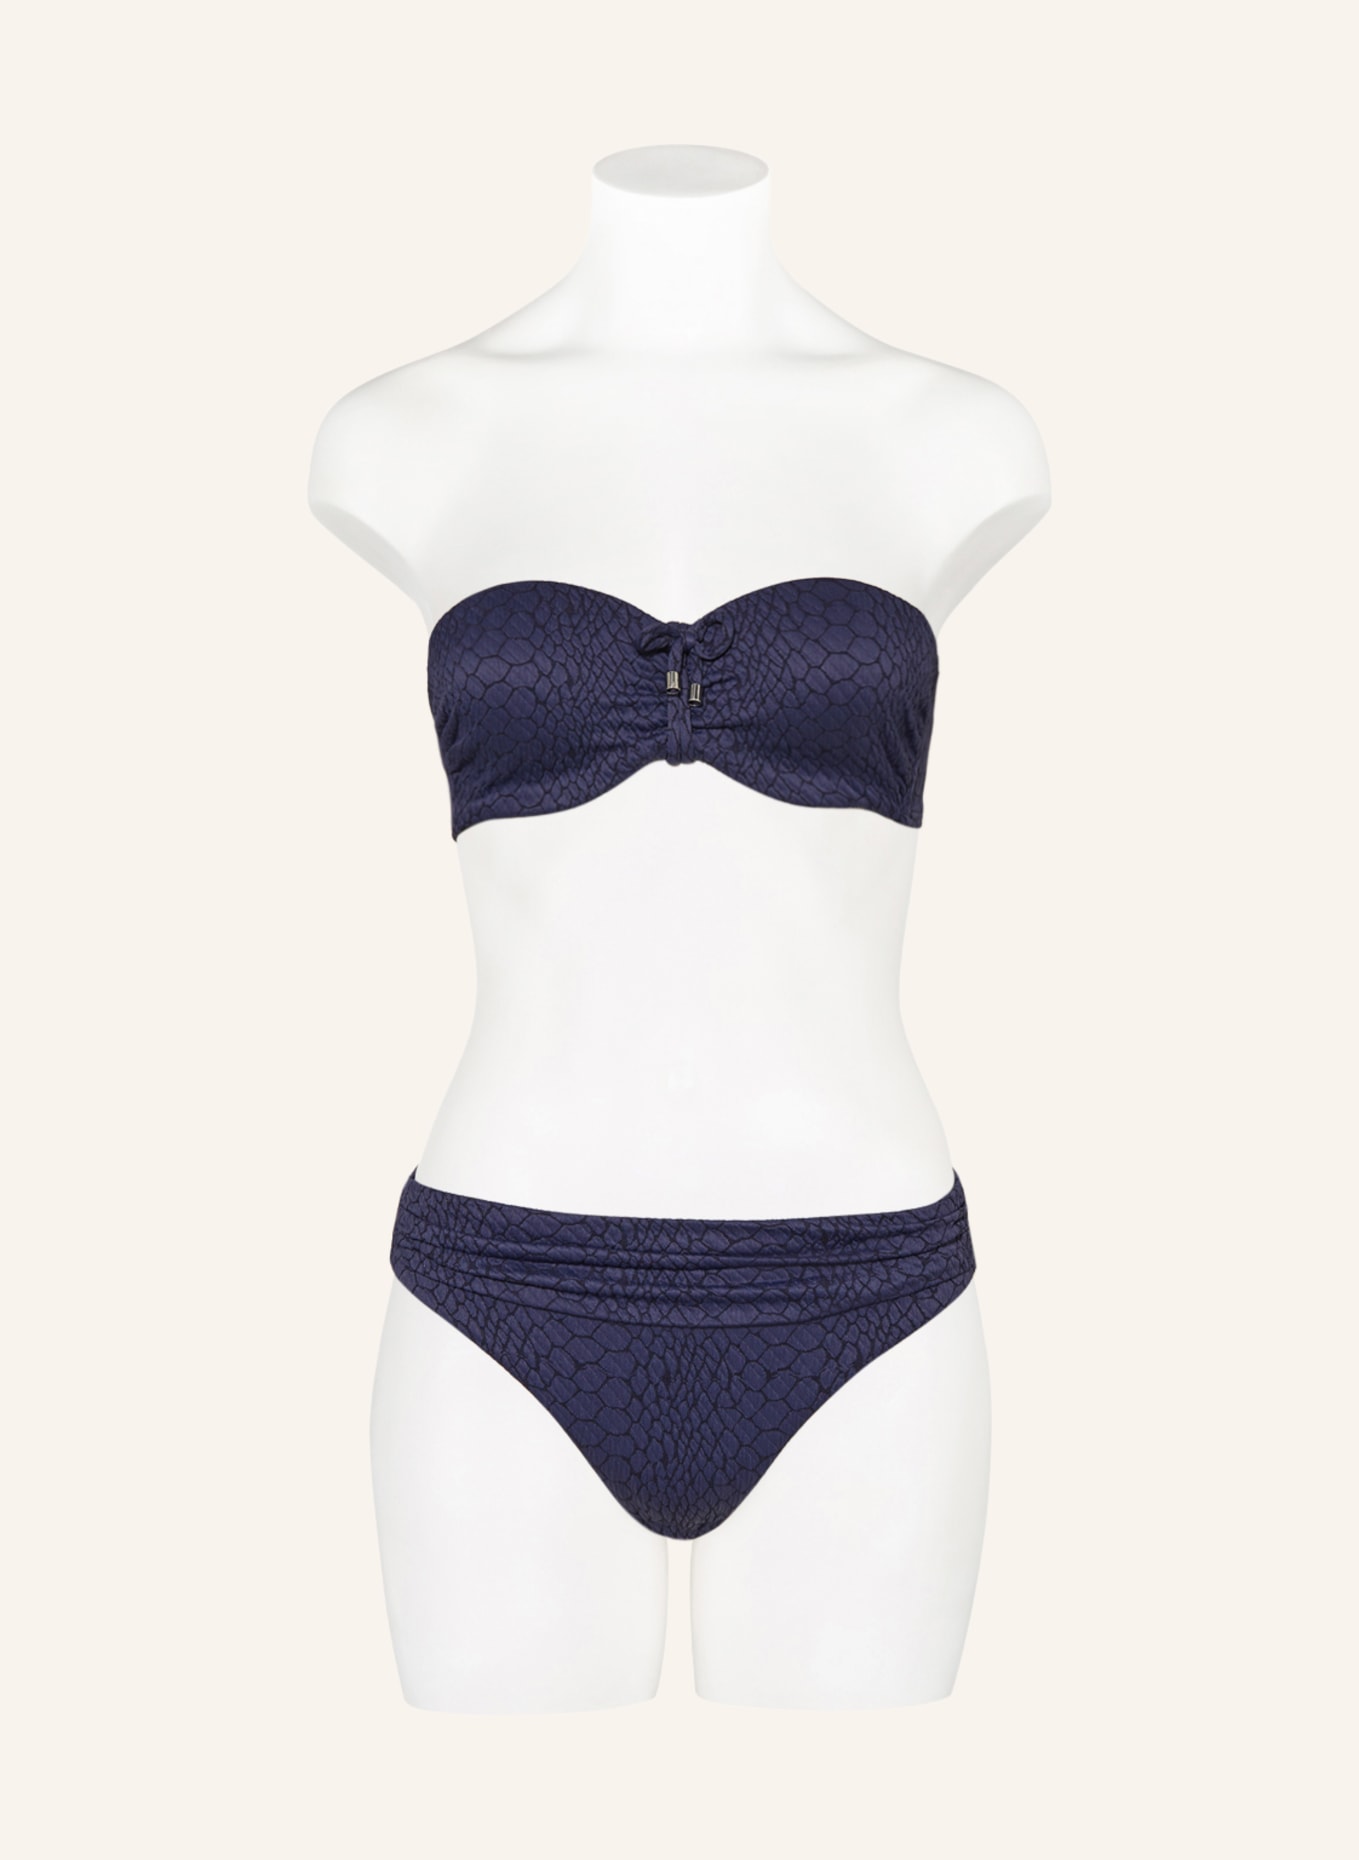 CYELL Underwired bikini top SOLID SNAKE, Color: DARK BLUE (Image 4)